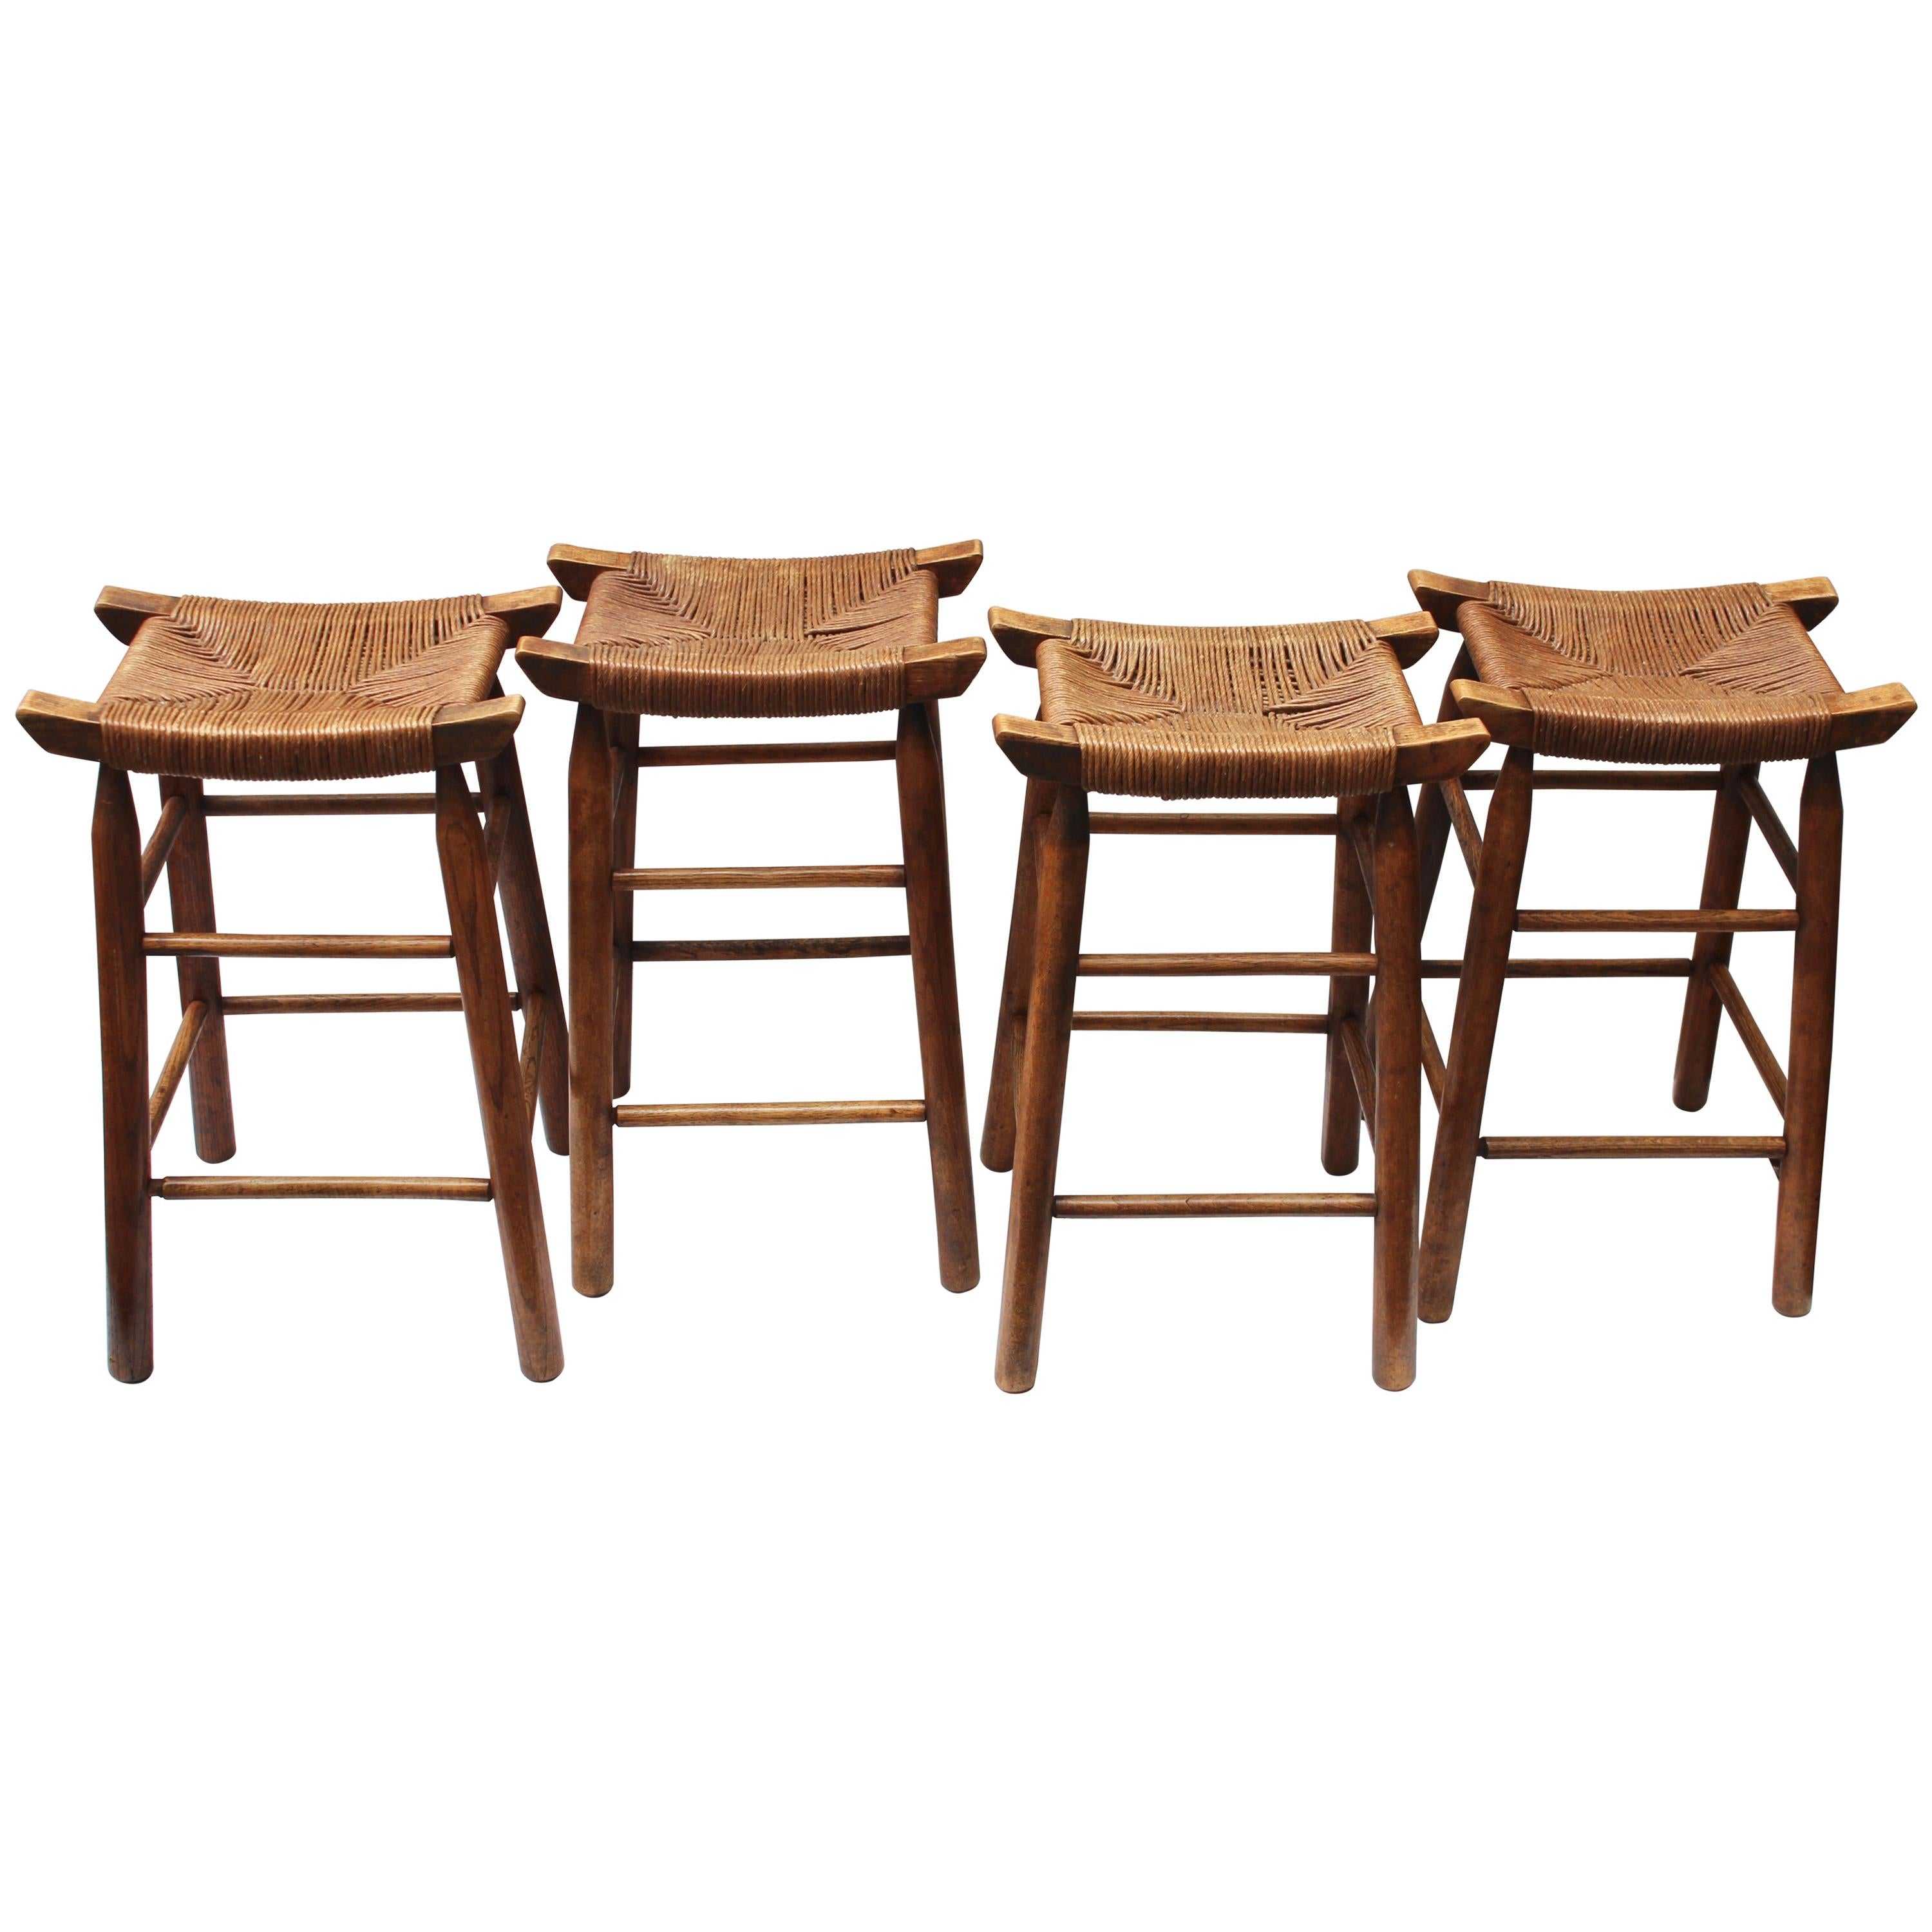 Set of Four Wood Stools with Rush Seats